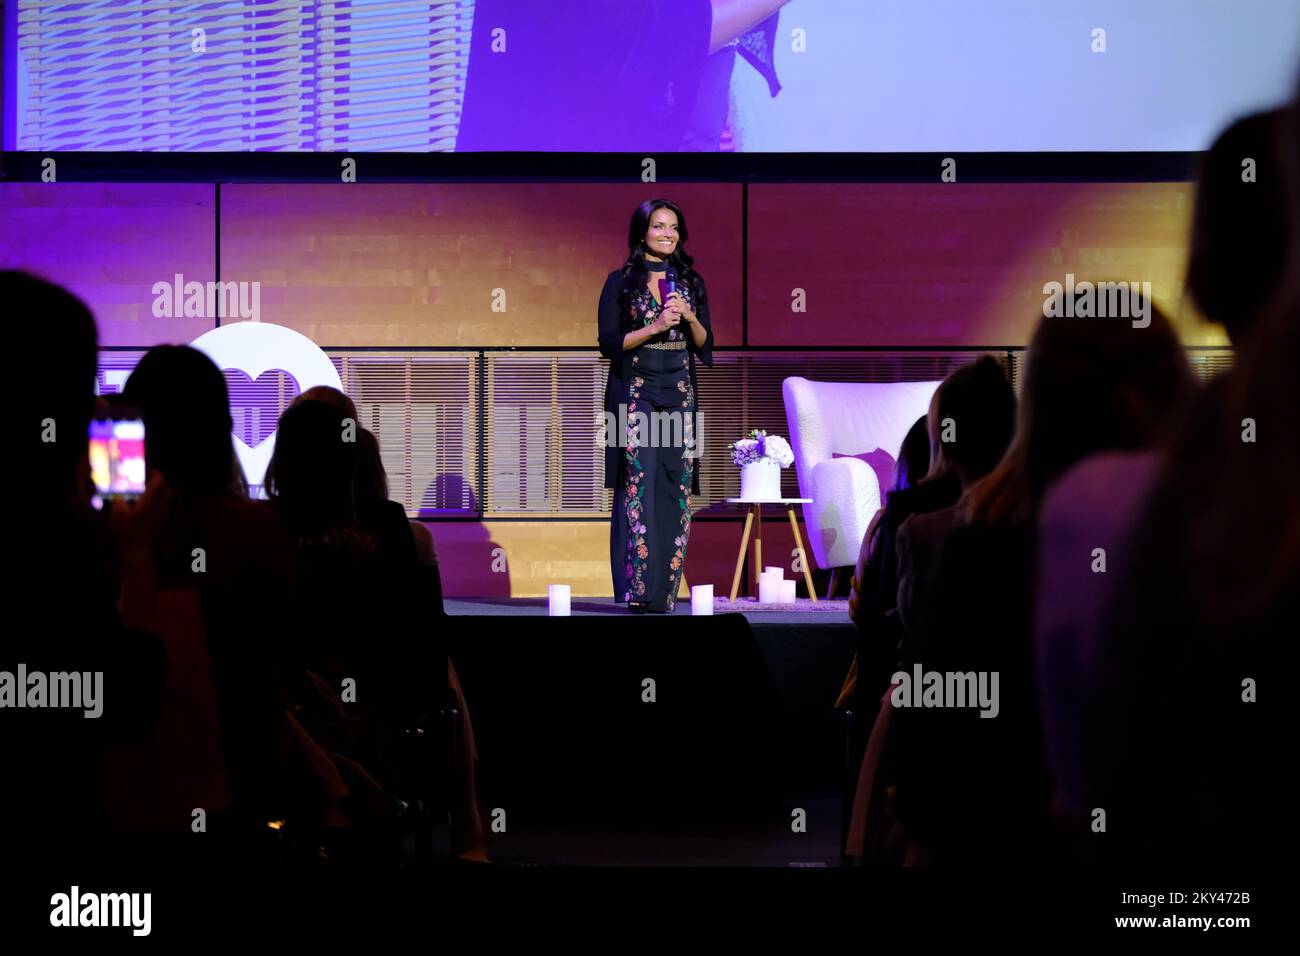 The world's leading parenting expert, clinical psychologist and New York Times bestselling author, Dr. Shefali Tsabary, gave a lecture on the concept of conscious parenting held at the Mozaik Event Center in Zagreb, Croatia on September 21, 2022. Photo: Slaven Branislav Babic/PIXSELL Stock Photo